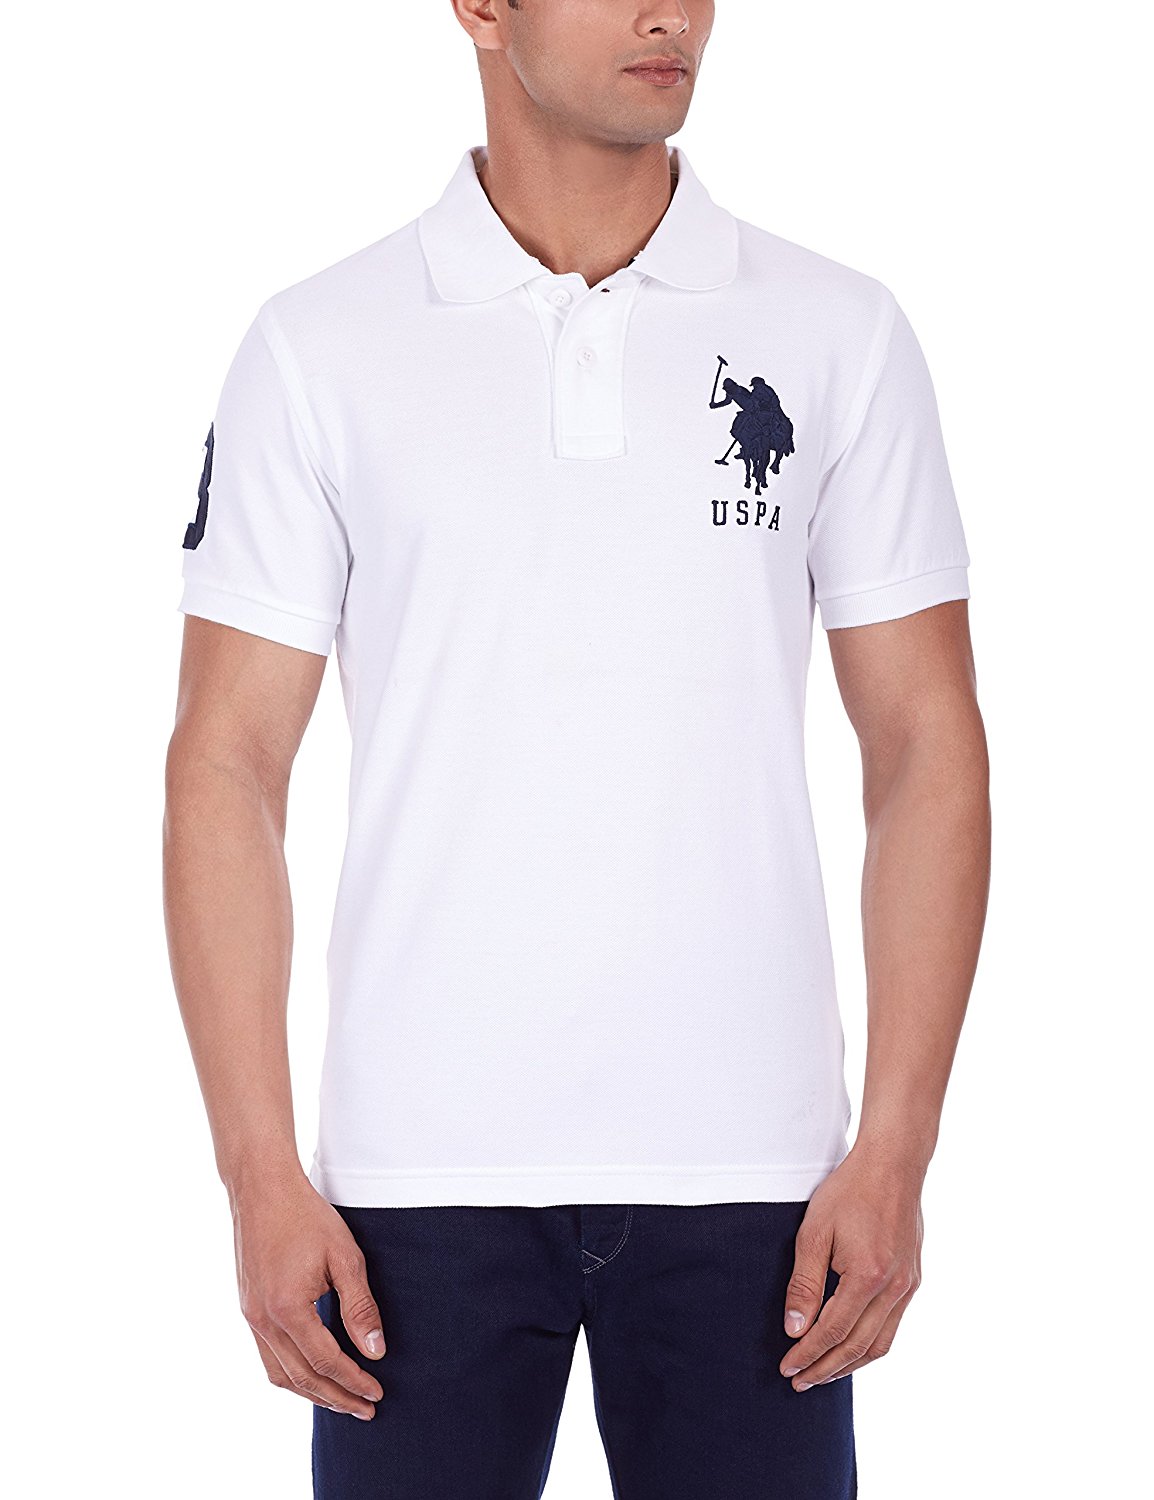 Rules survival us polo assn t shirts buy online dds maxi